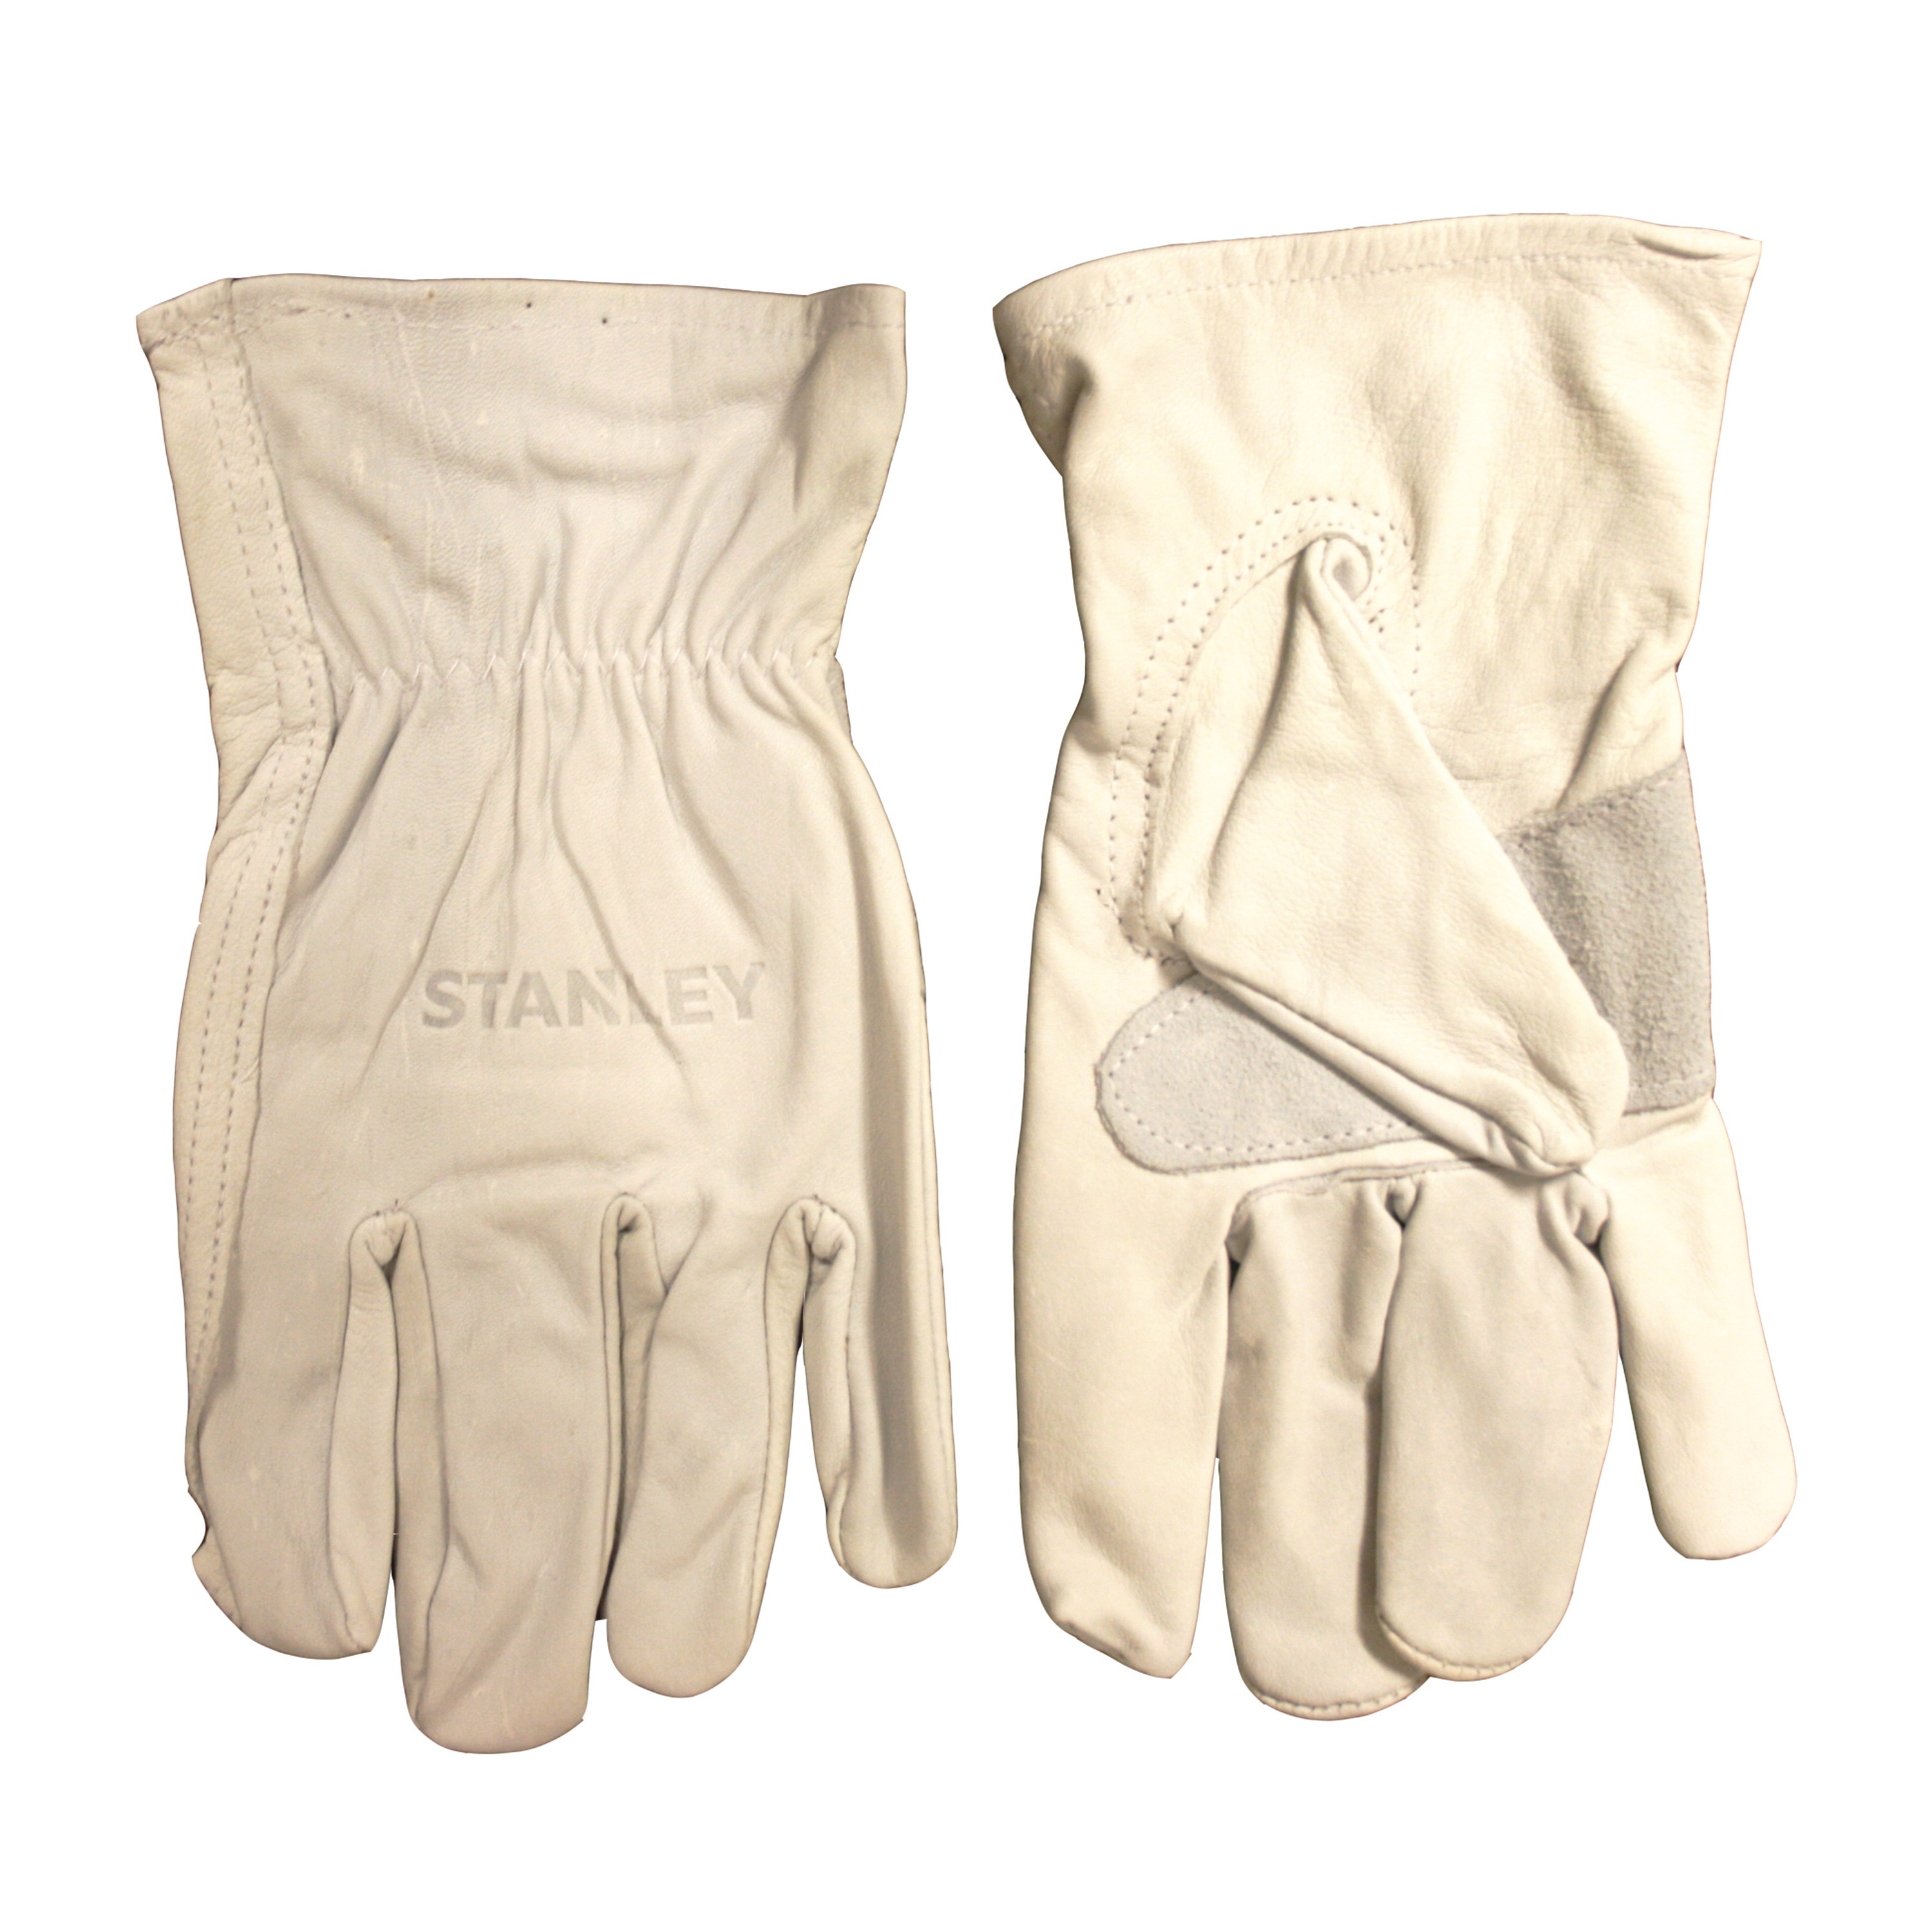 Stanley Tools - Grain Goatskin Driver Gloves with a Palm Patch - S85211